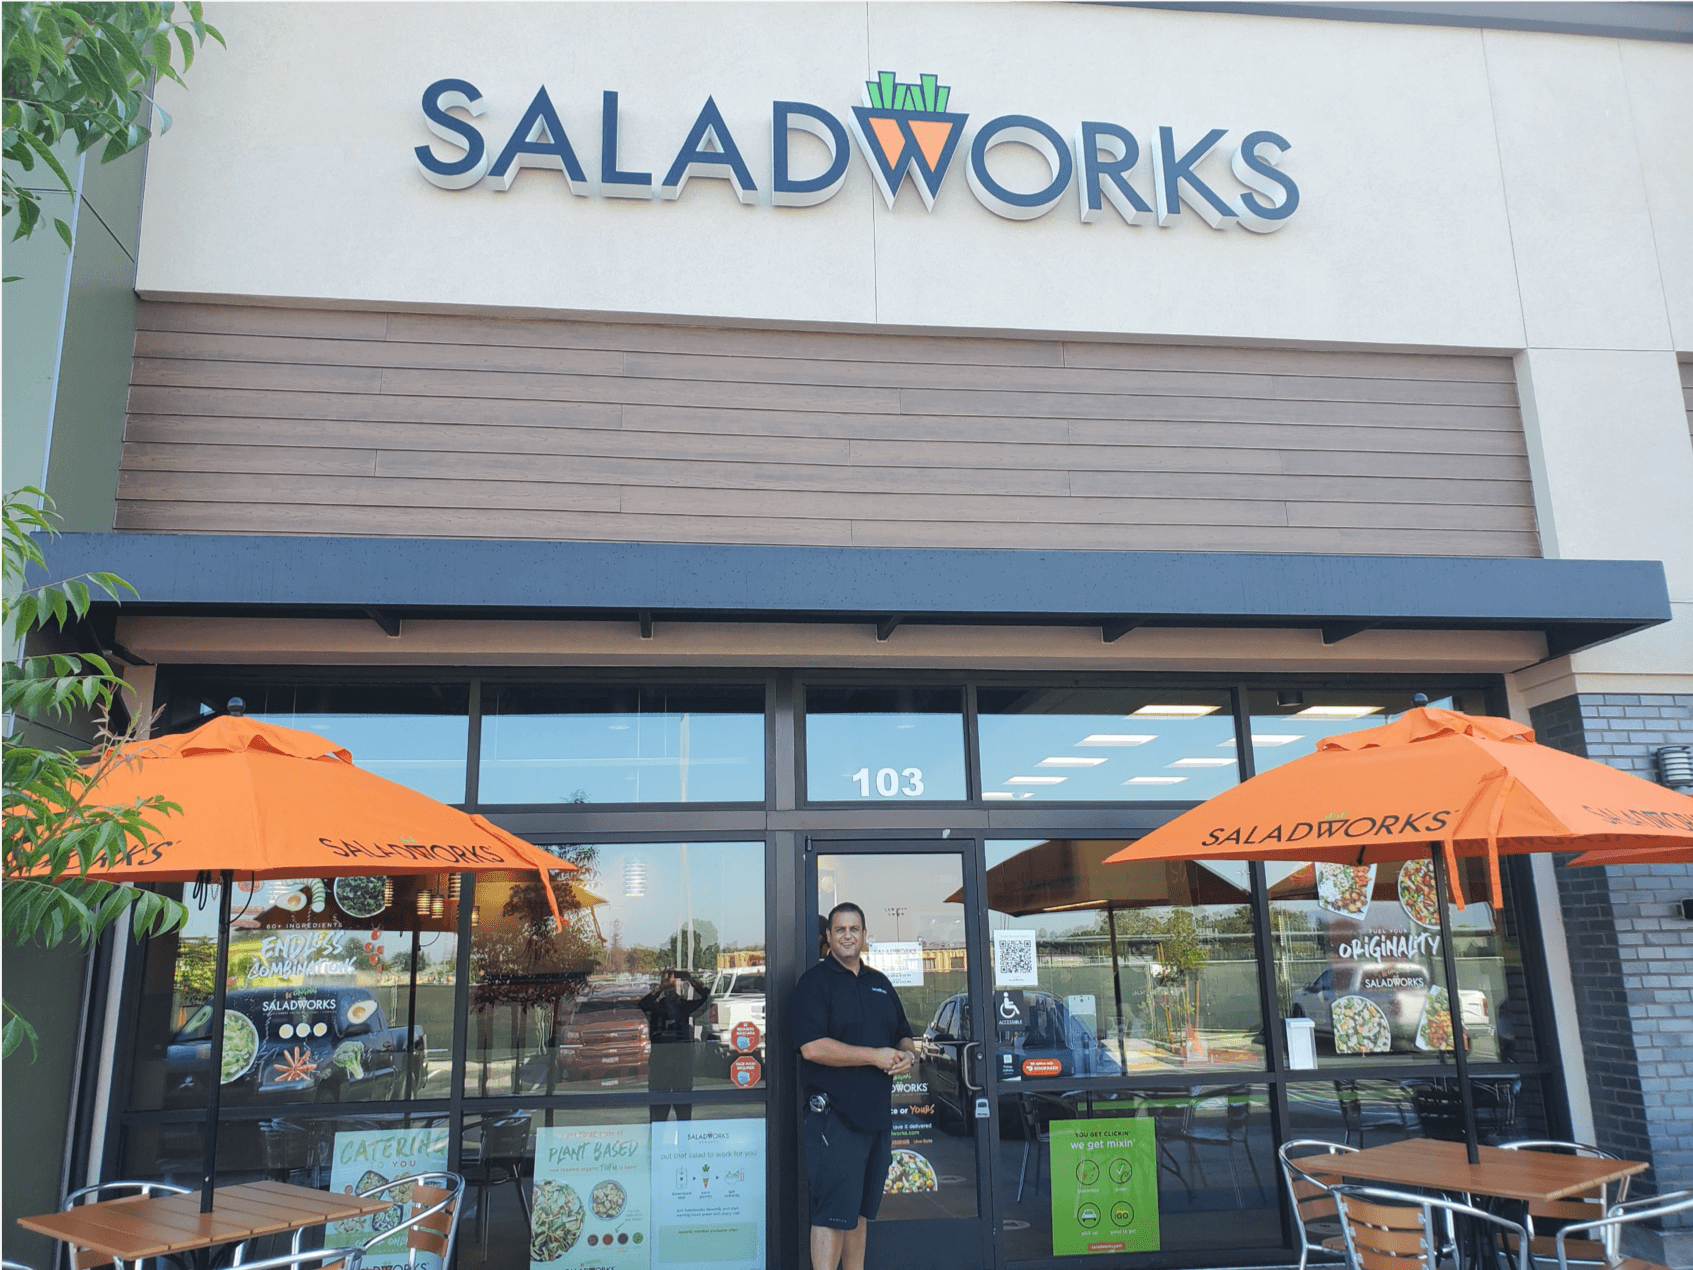 WOWorks Embraces Technology Partnerships to Drive Restaurant Growth and Performance Improvement |